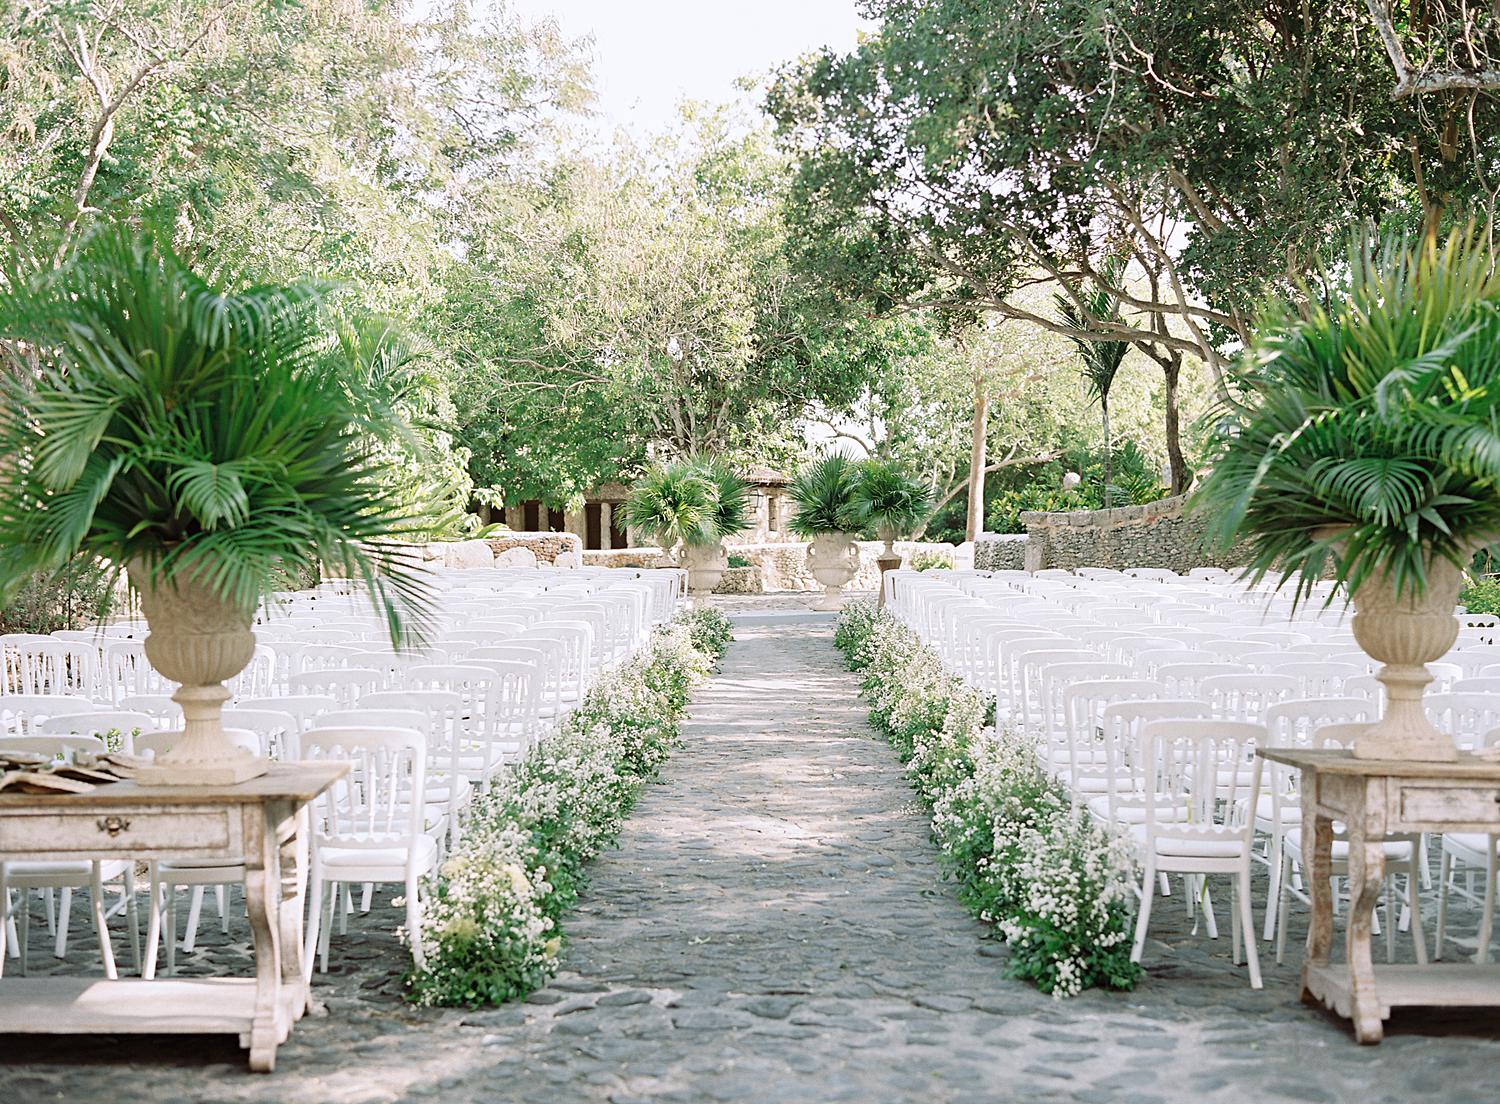 Ceremony details with a greenery lined aisle for an outdoor wedding at Altos de Chavón.